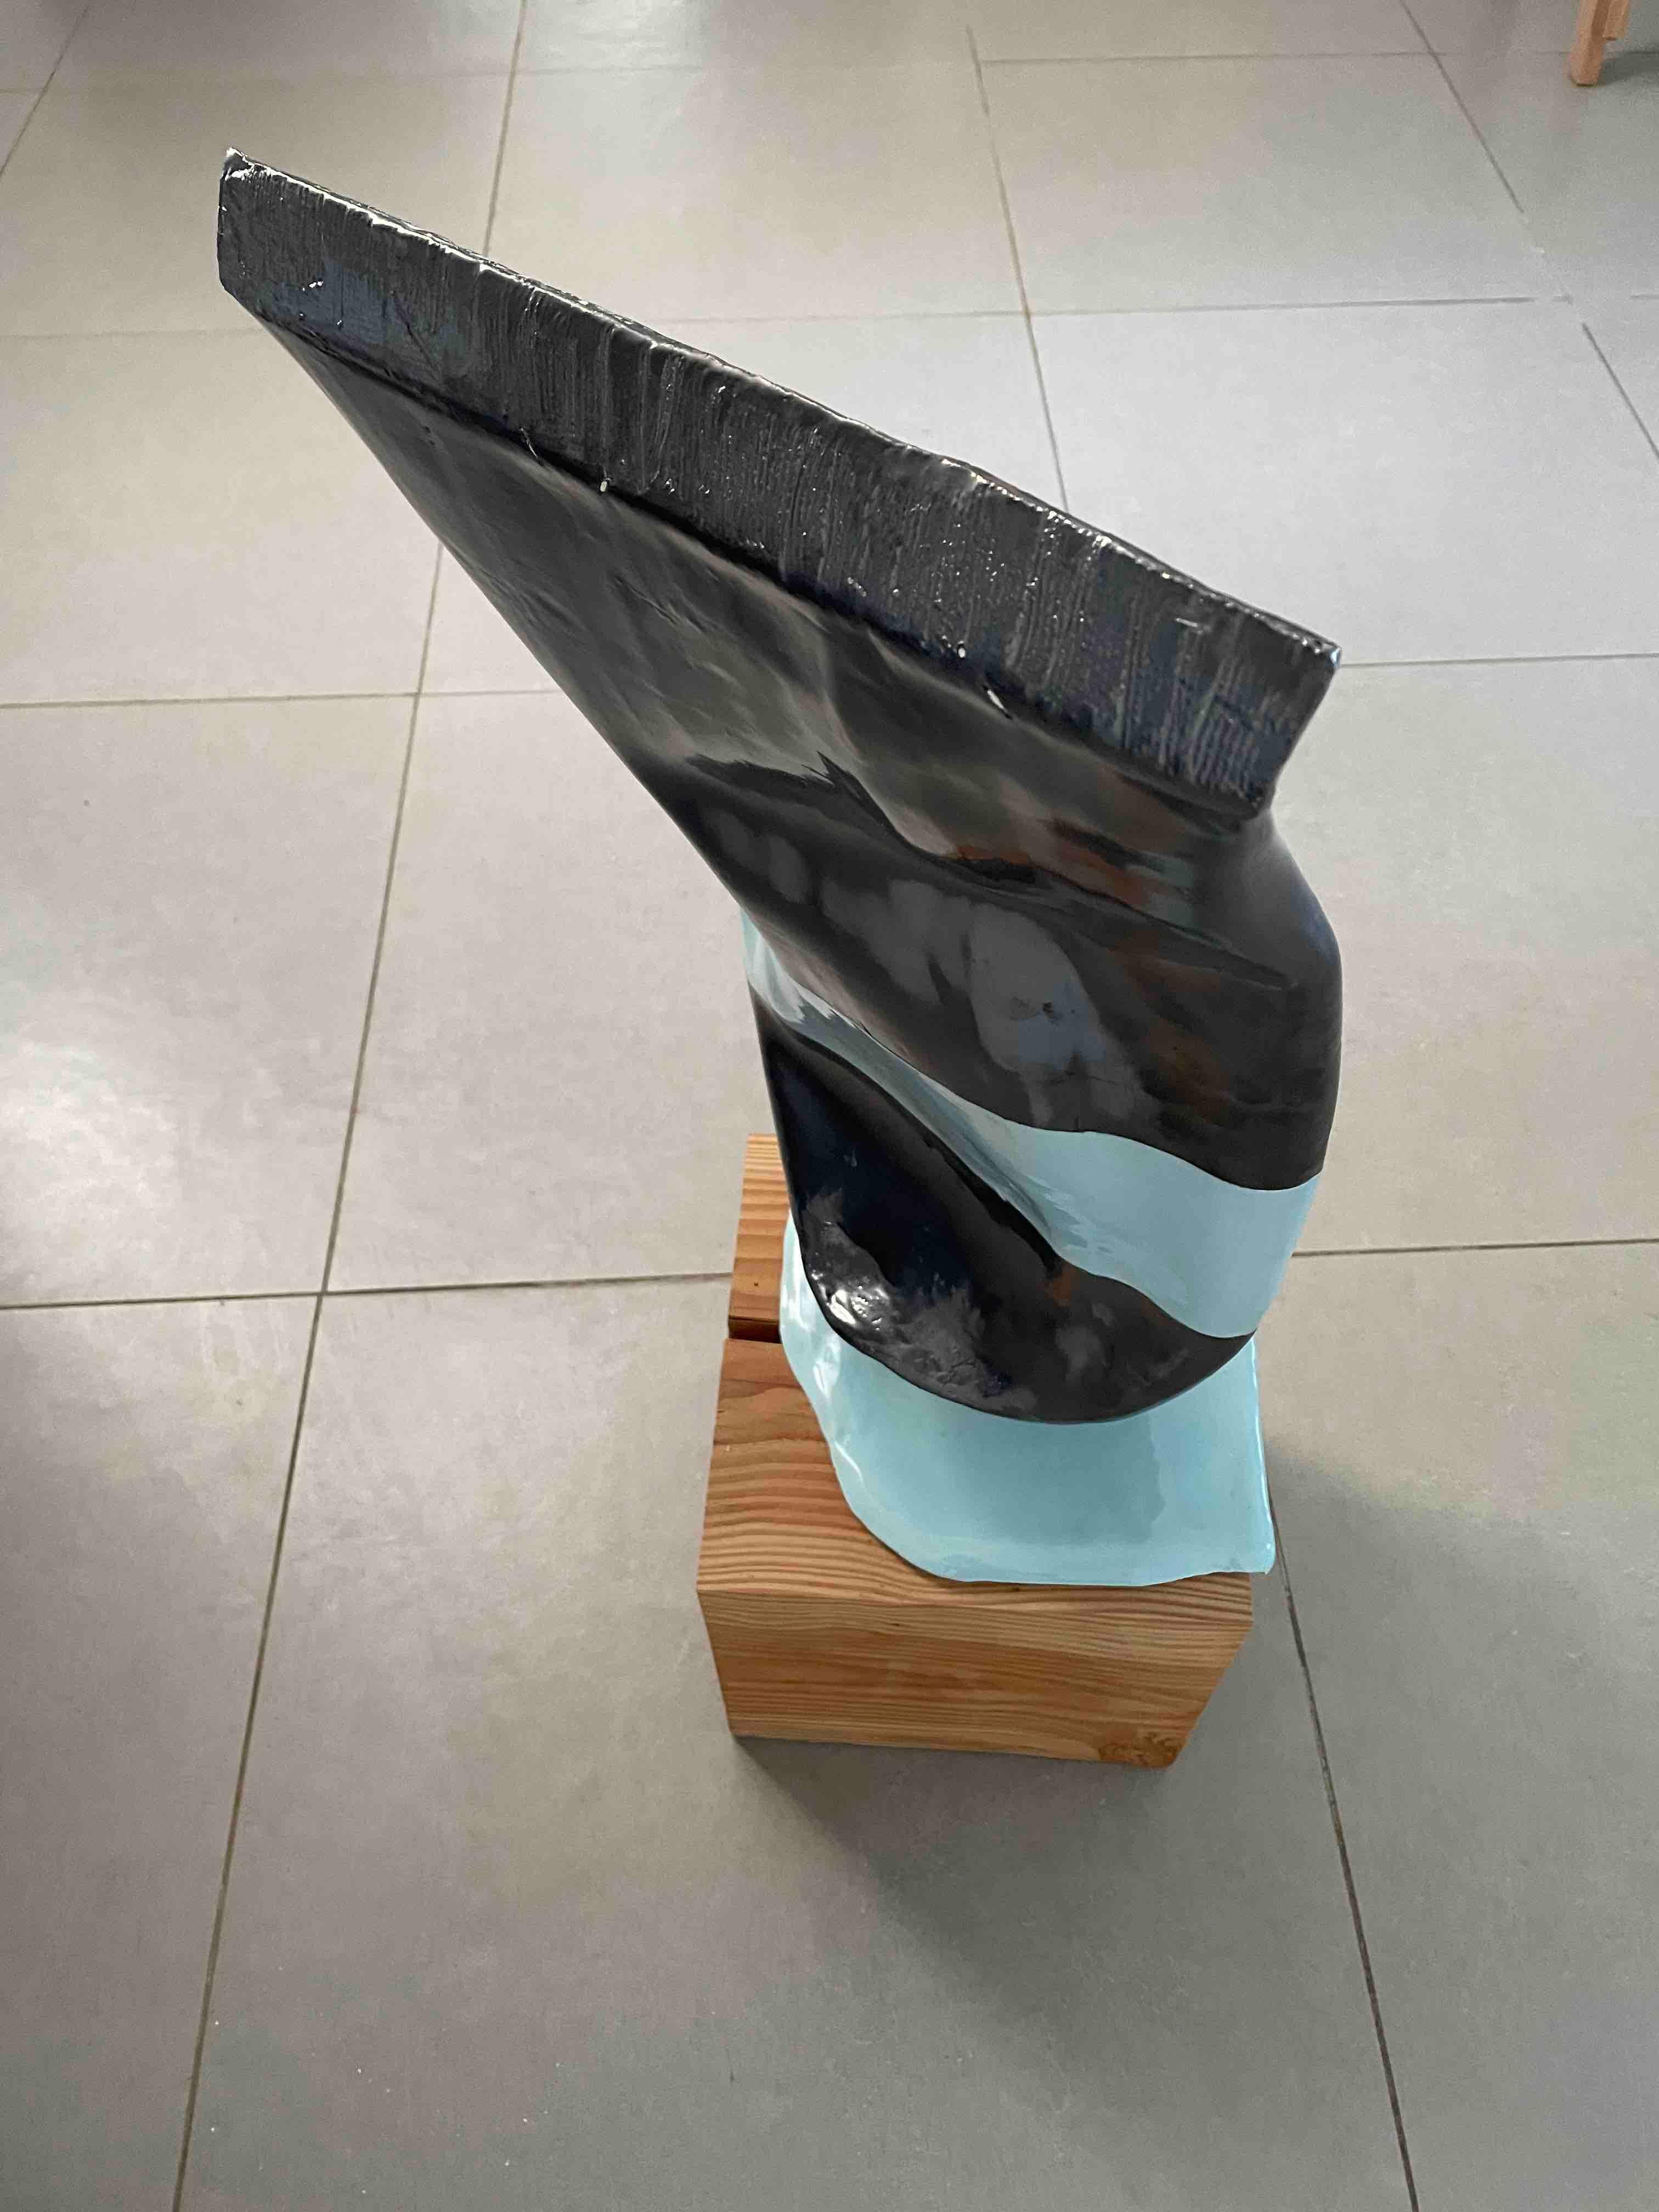 Paint tube  - standing sculpture - Contemporary Sculpture by Tal Sharvit